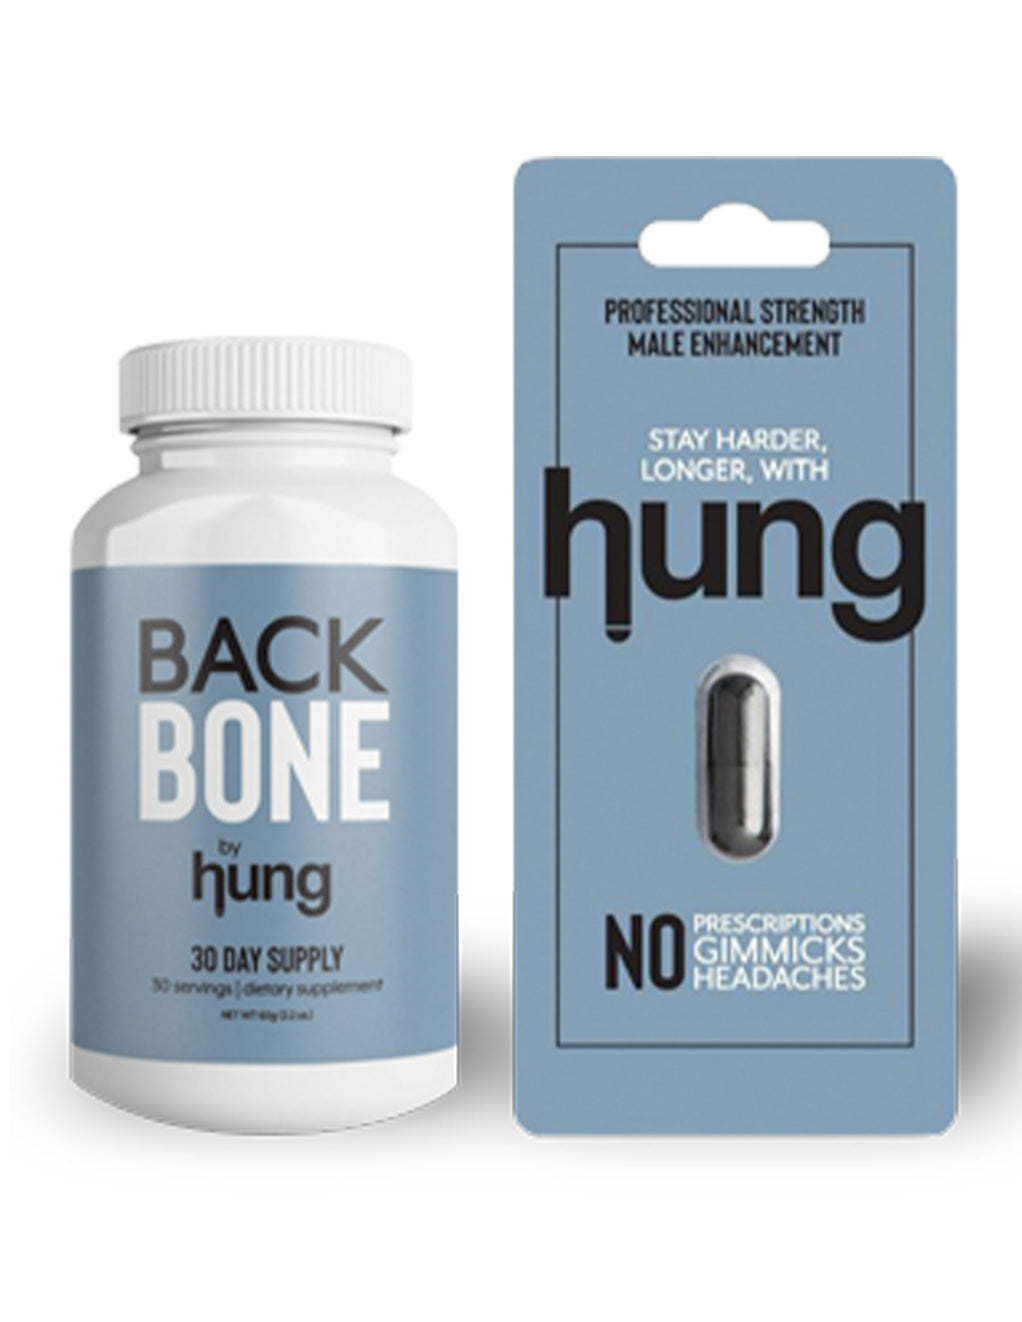 Hung Male Sexual Enhancement Supplement- With backbone